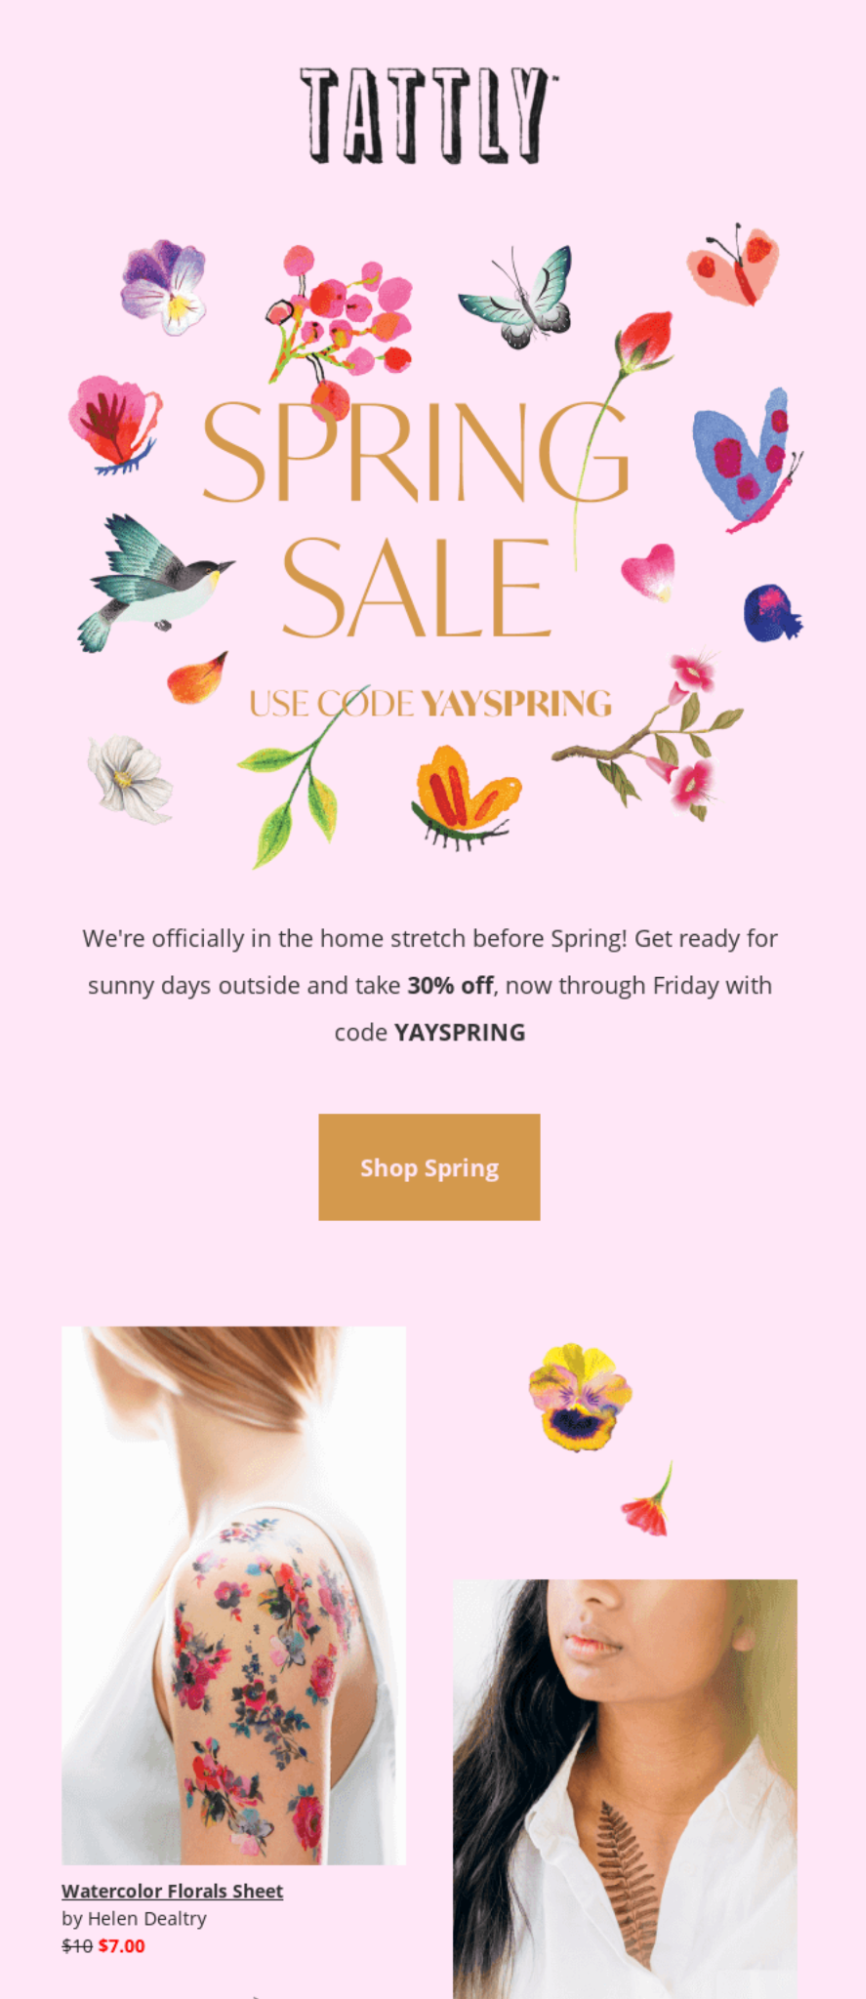 Spring sale newsletter from Tattly